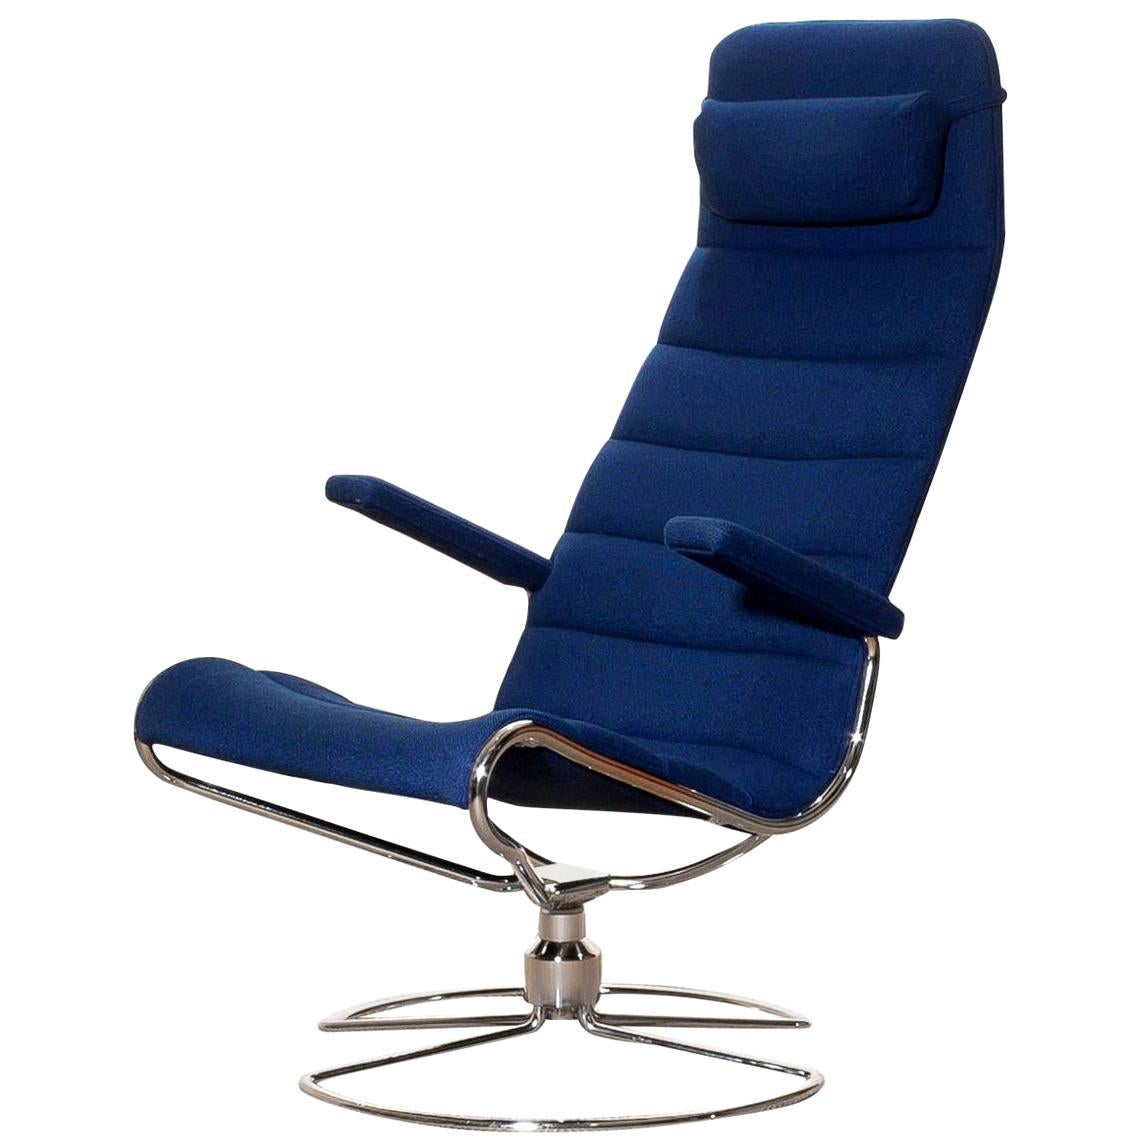 Beautiful 'Minister' chair designed by Bruno Mathsson.
It is upholstered with a Royal blue wooden fabric mounted on a swivel base of tubular chromed steel.
The chair is in very good condition.
Period 1980s.
Dimensions: H 109 cm x W 60 cm x D 77